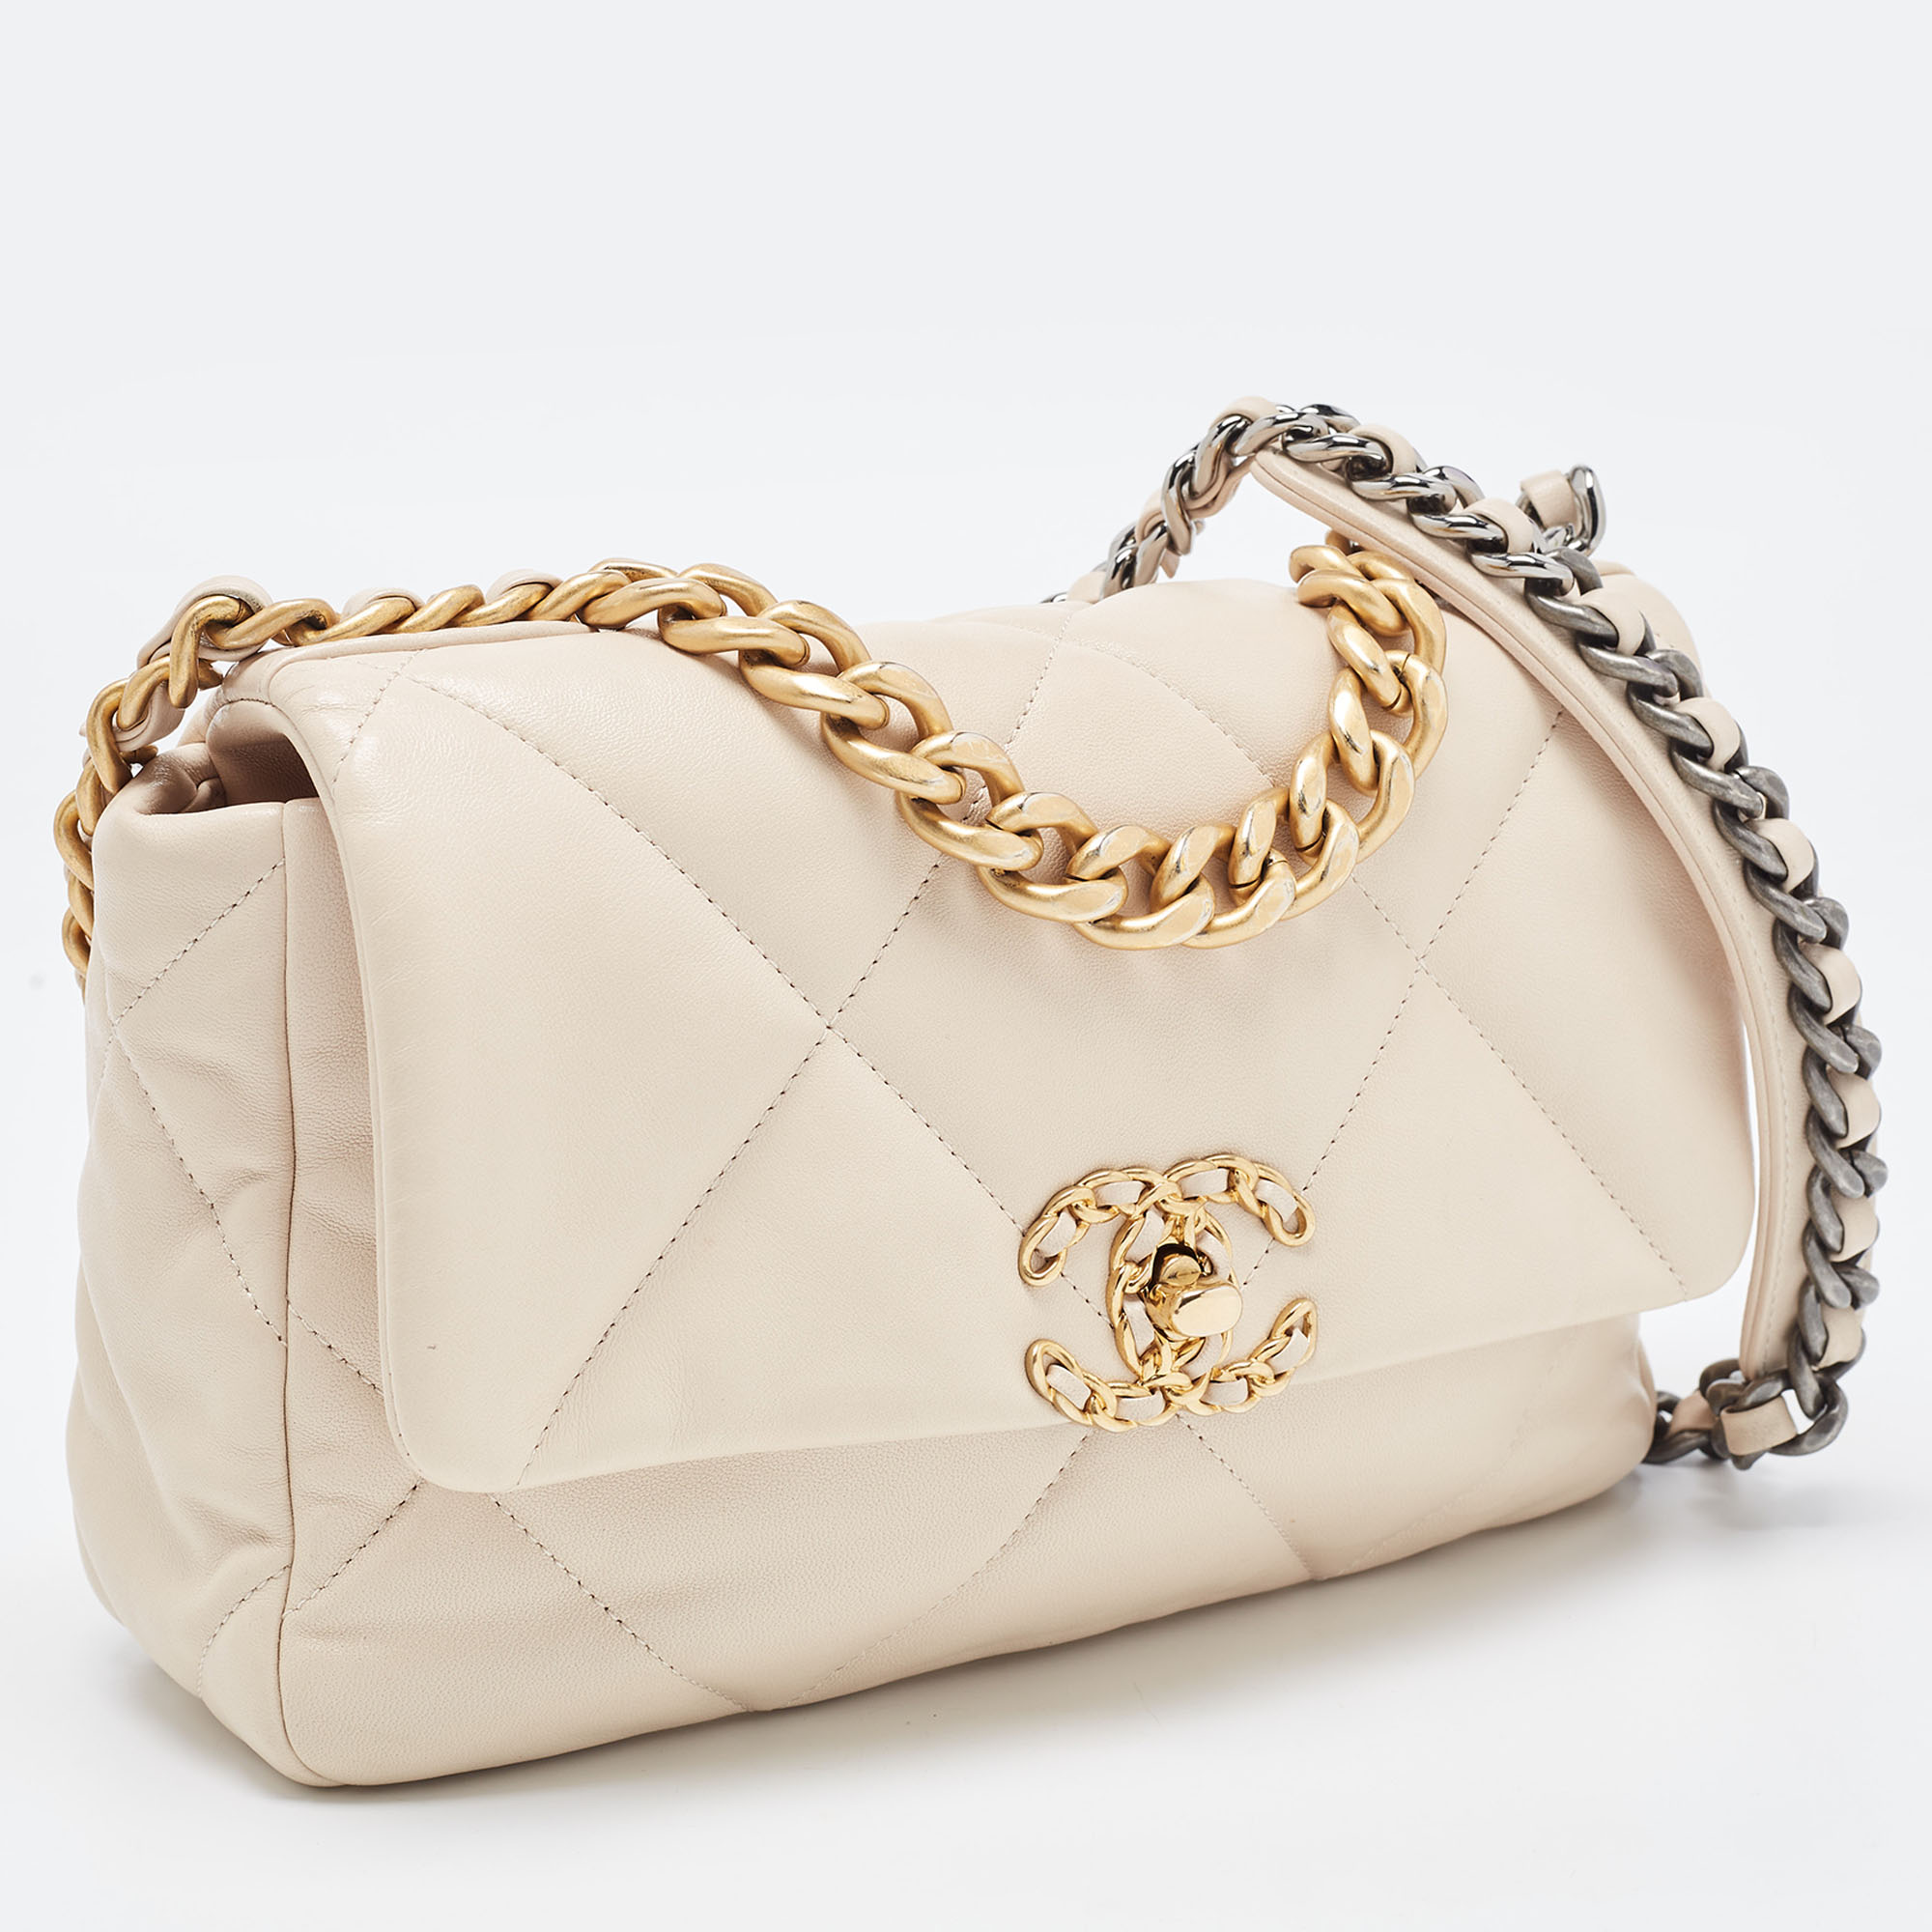 Chanel Beige Quilted Leather Medium 19 Flap Bag